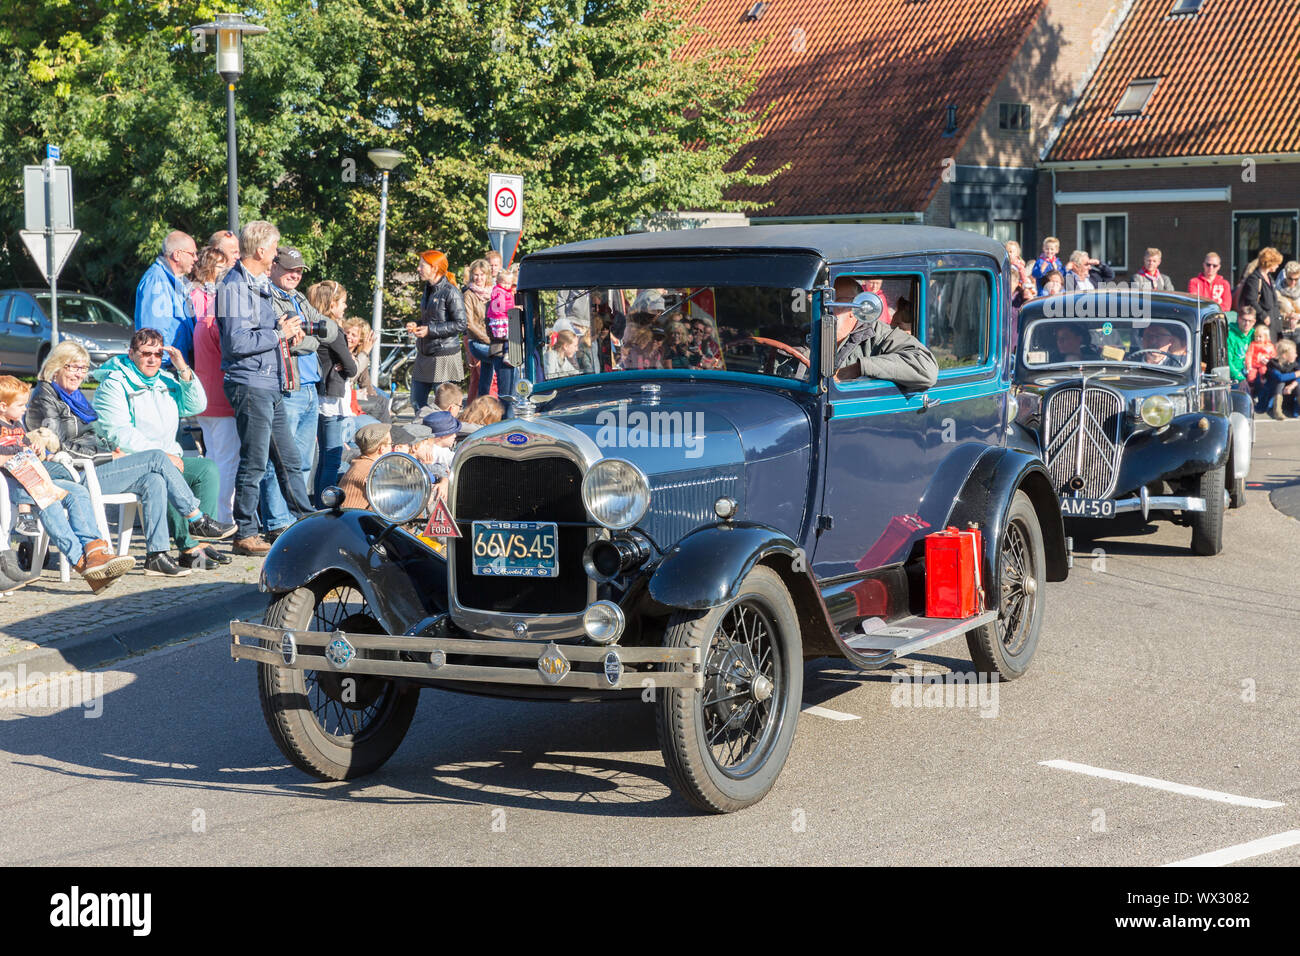 Oldtimer cars in a countryside parade agricultural festival, the Netherlands Stock Photo